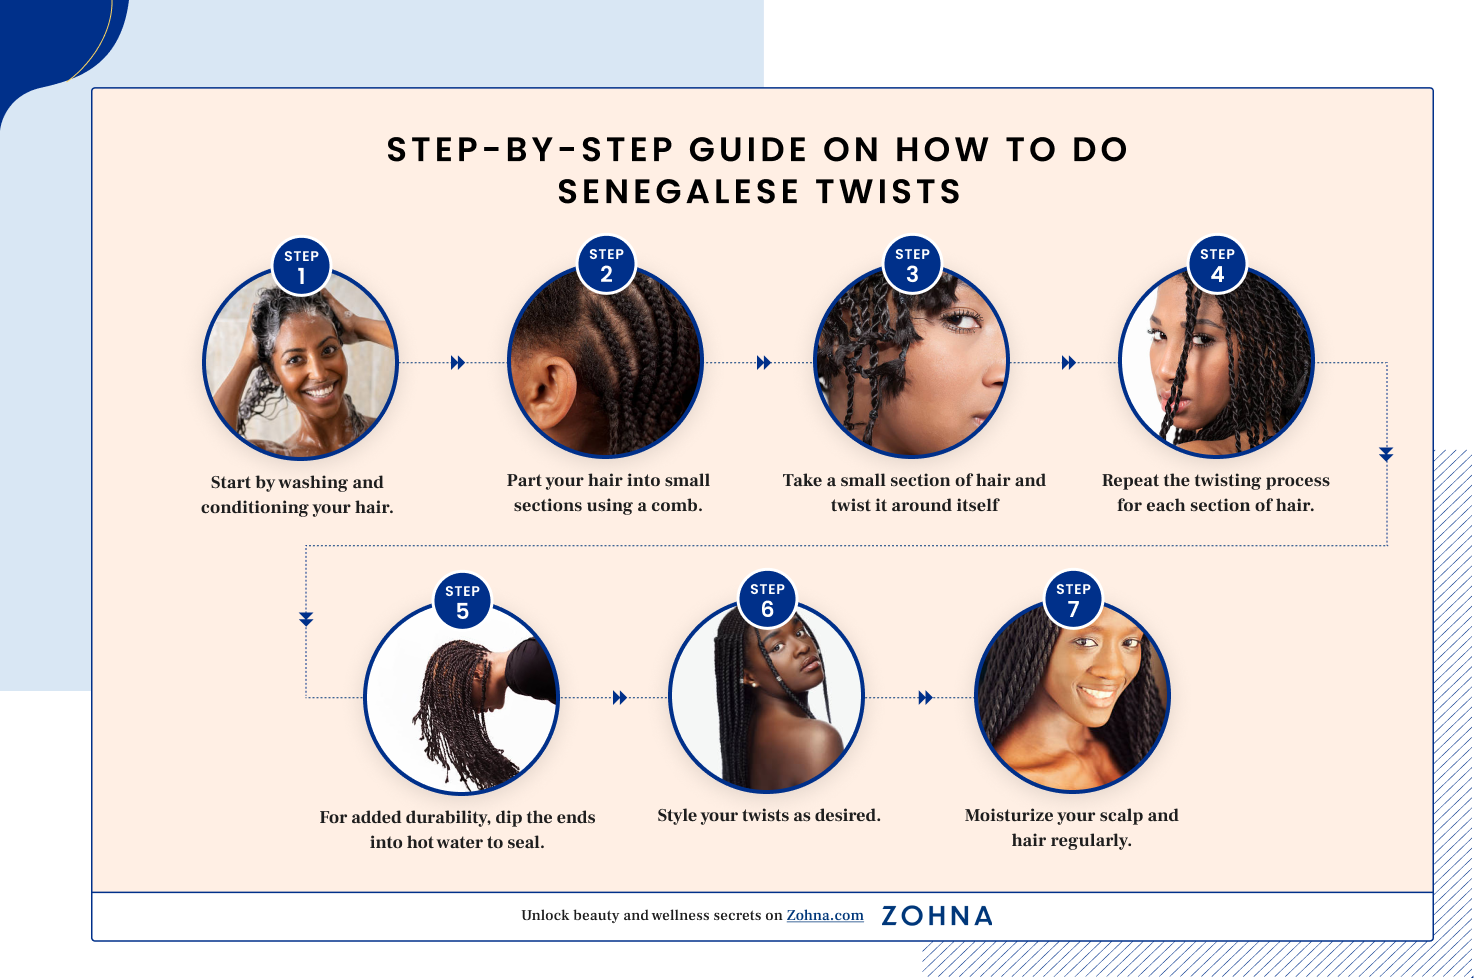 Step-by-Step Guide on How to Do Senegalese Twists